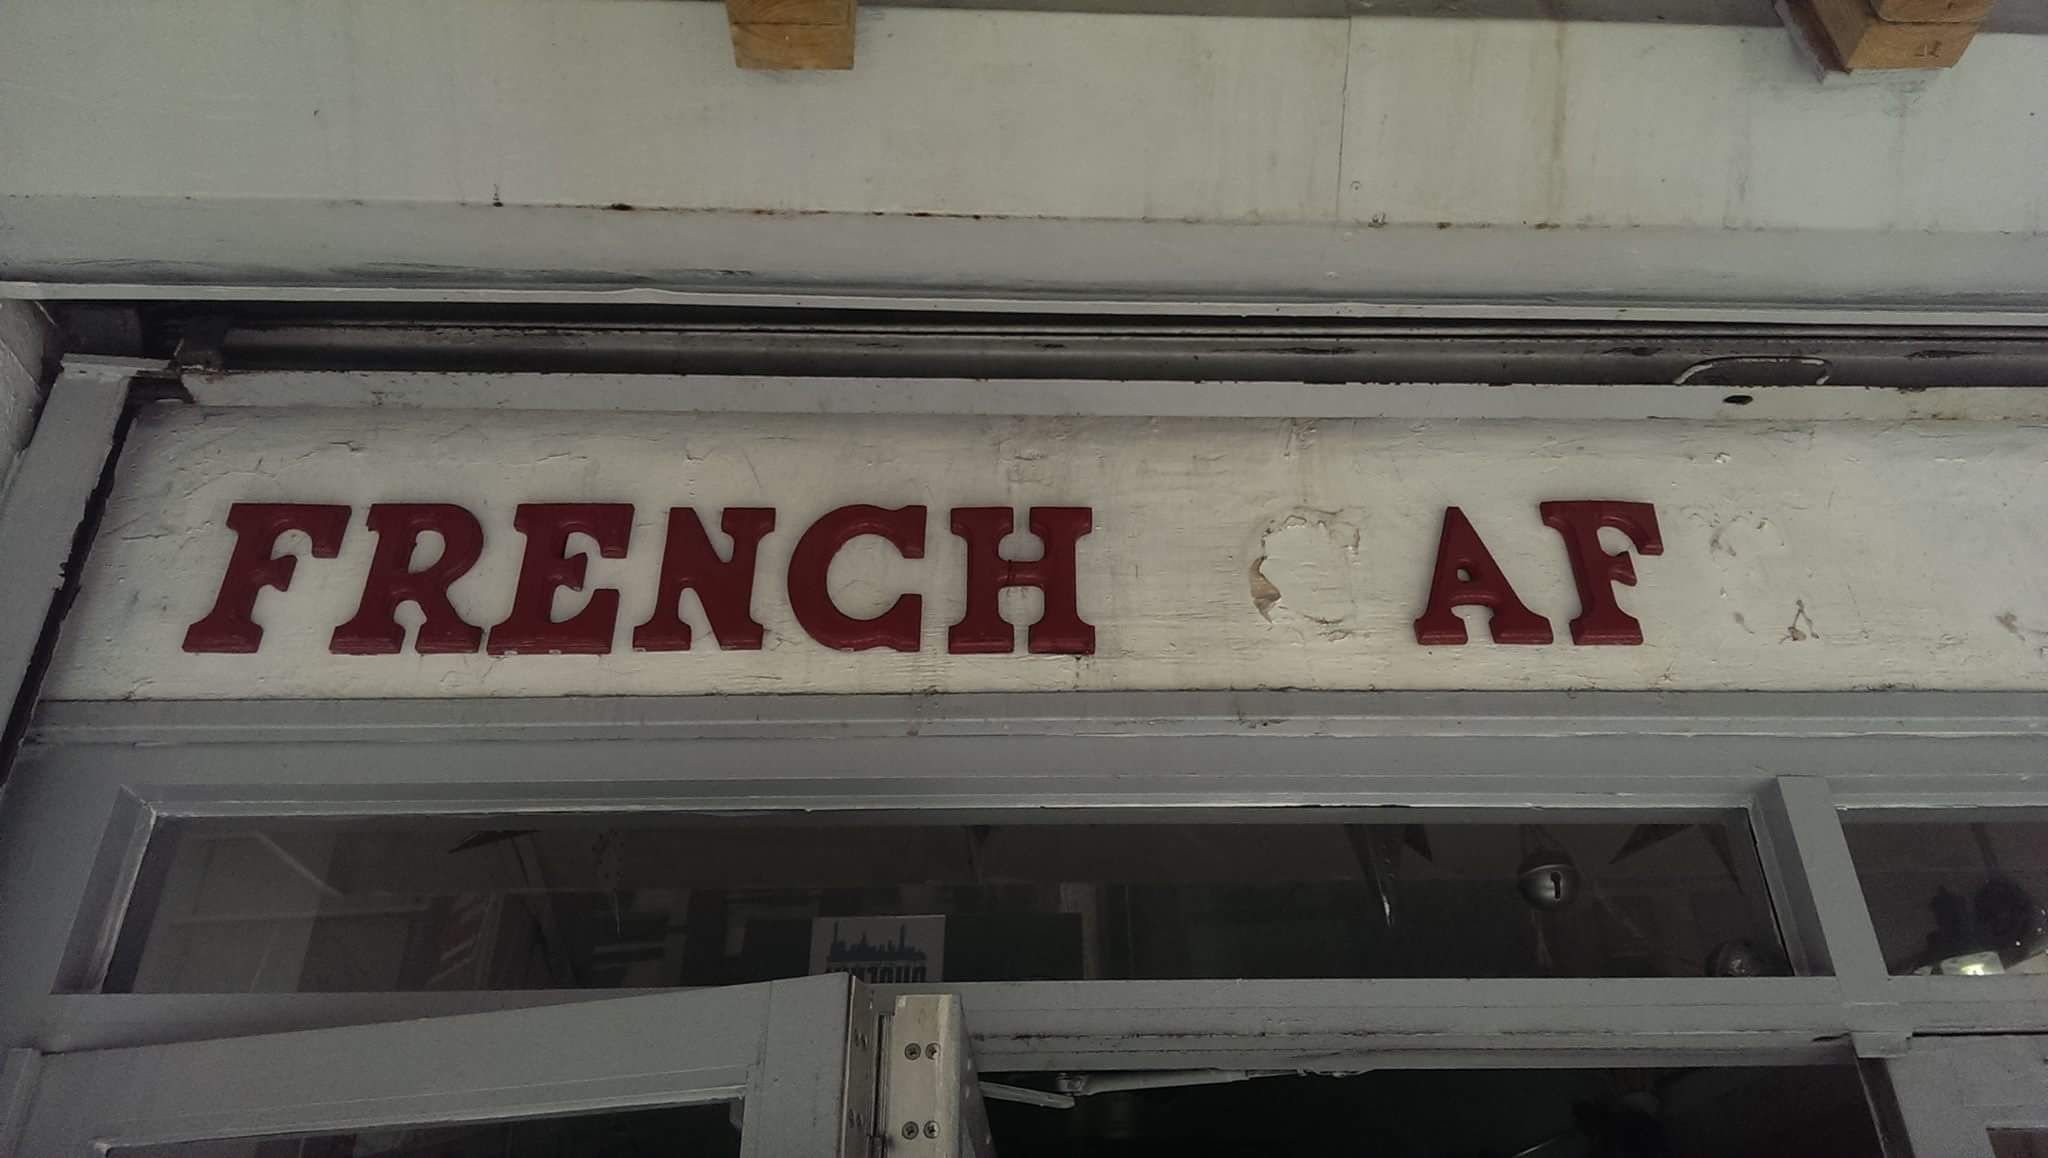 This cafe is sooooo French!